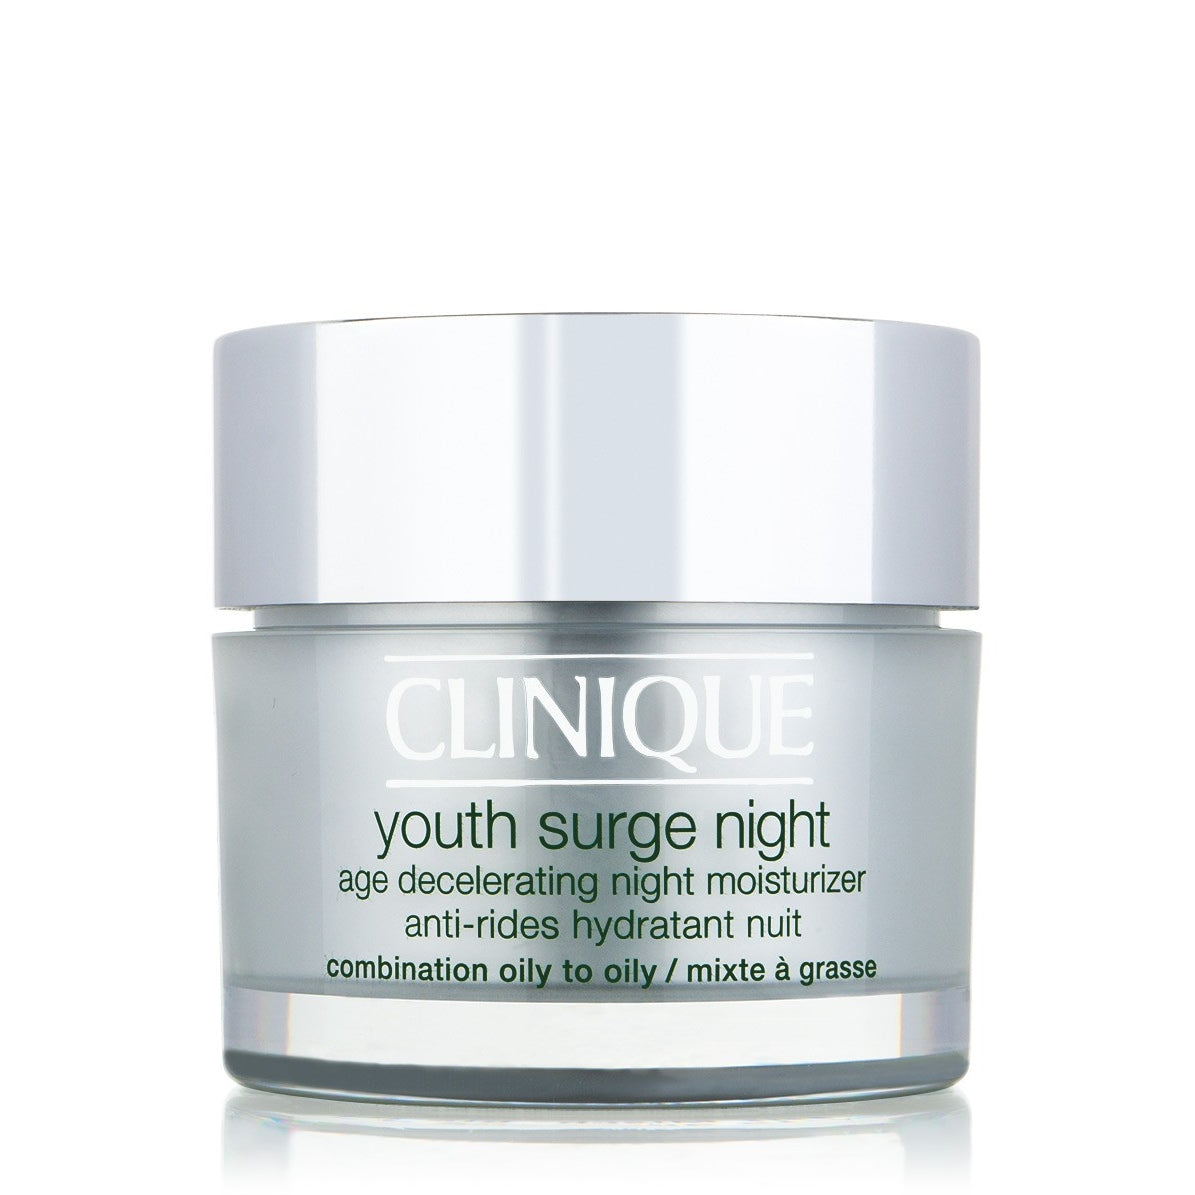 Crema Viso Clinique Youth Surge Night Dry Combination Mixte A Grasse 50ml Tester